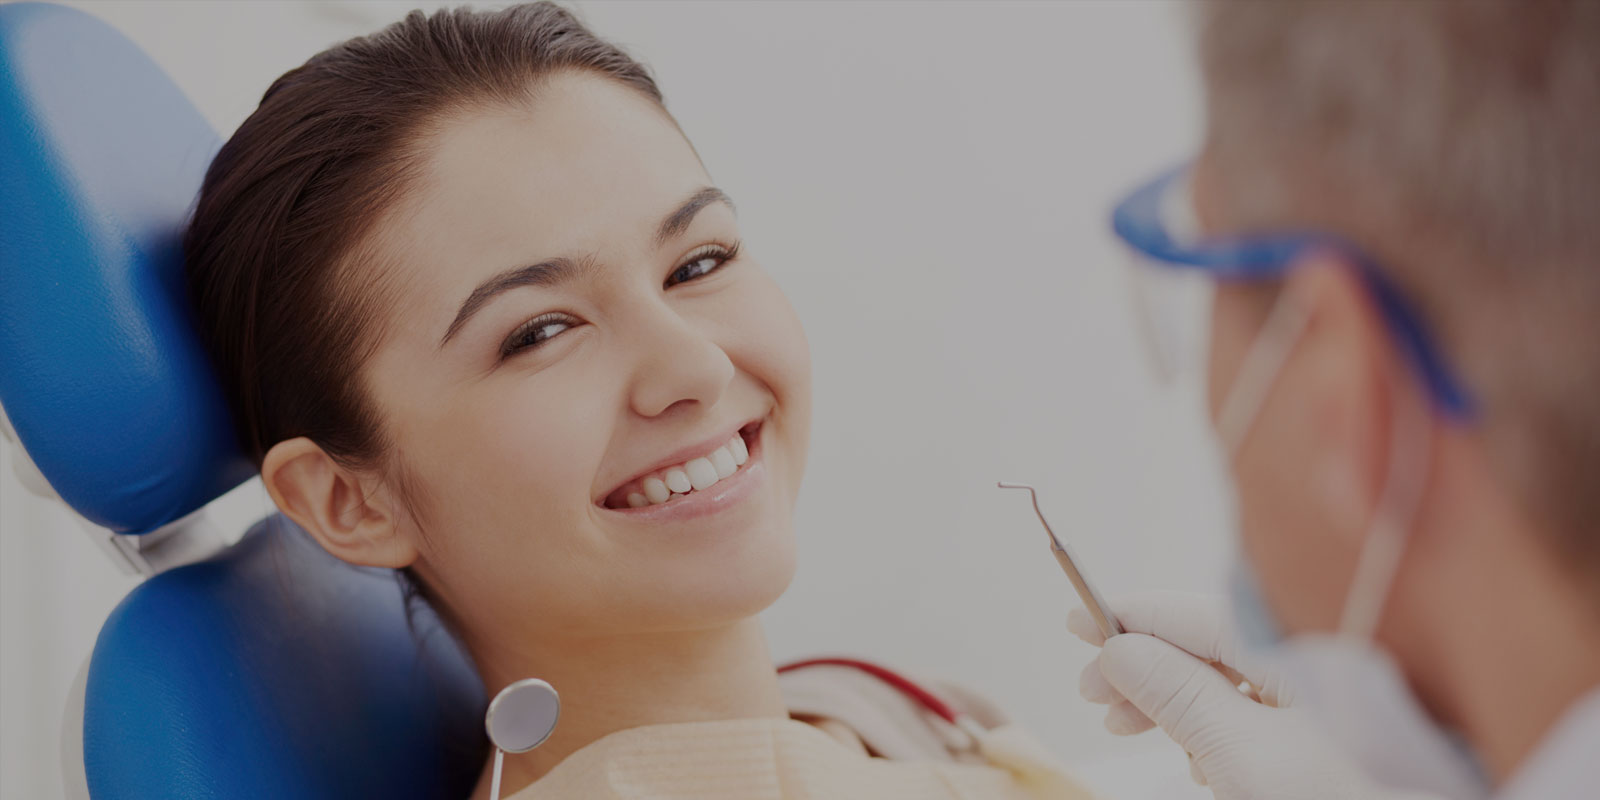 Quick Tips on How to Find A Good Dentist